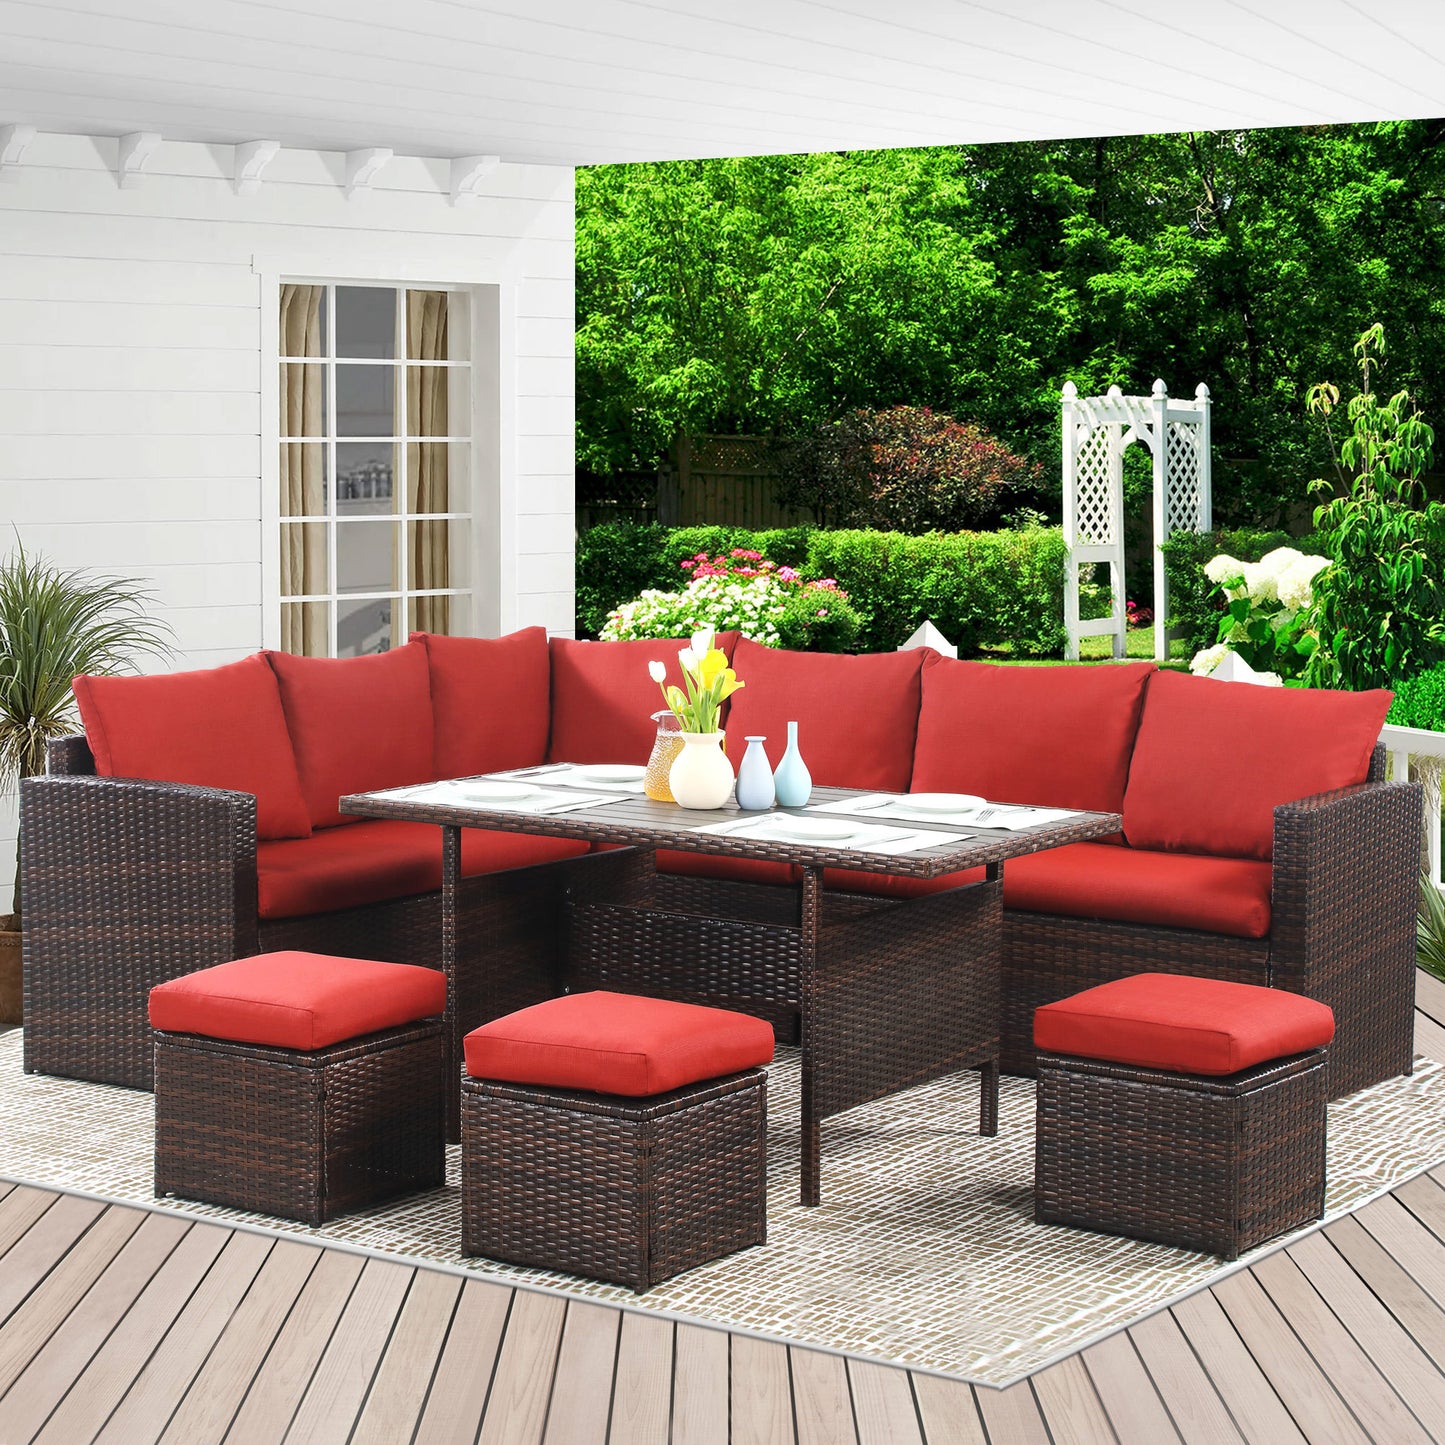 7 Piece Outdoor Dining Sectional Sofa with Dining Table